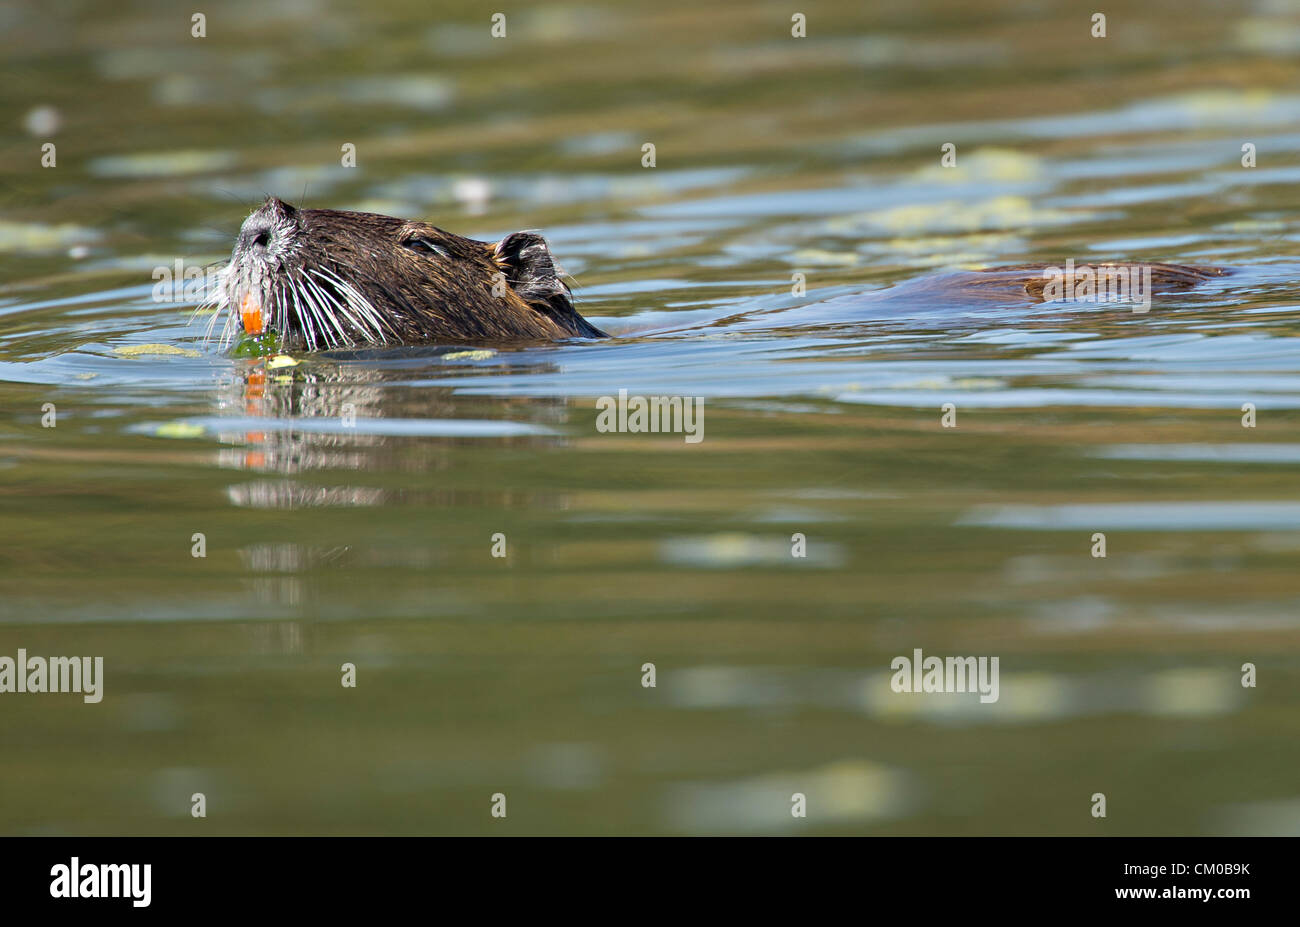 Sept. 7, 2012 - Roseburg, Oregon, U.S - A nutria, also known as a river rat, swamp rat, and coypu swims in a pond at a city park in Roseburg.  Native to temperate and subtropical regions of South America the semi-aquatic rodent was introduced to North America, Europe, and Africa.  The animal is considered an invasive and destructive species throughout most of its range. (Credit Image: © Robin Loznak/ZUMAPRESS.com) Stock Photo